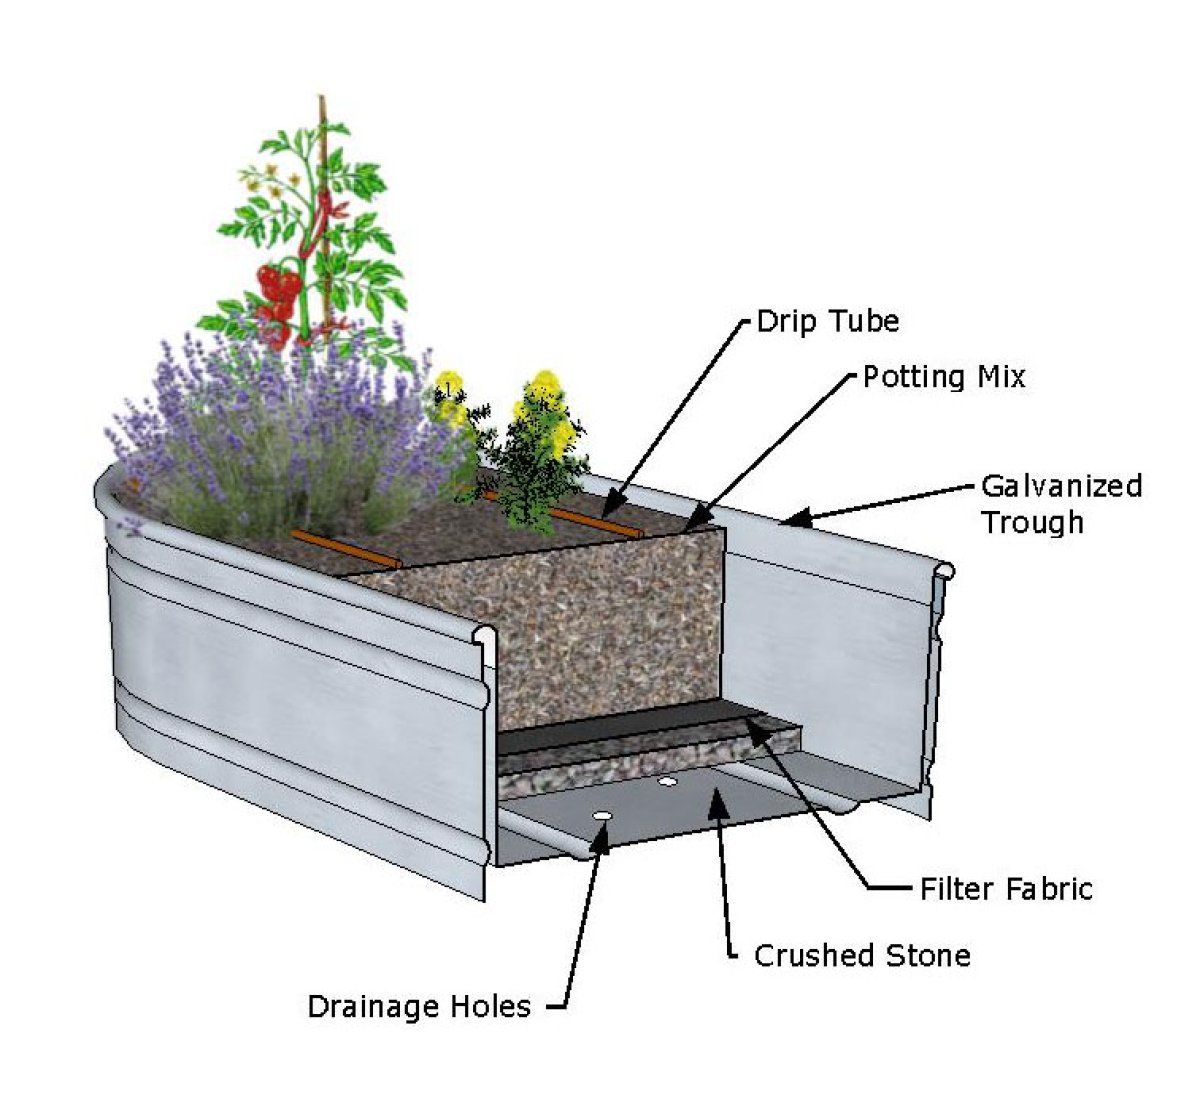 Cross-section of a typical raised garden made from a metal water trough.